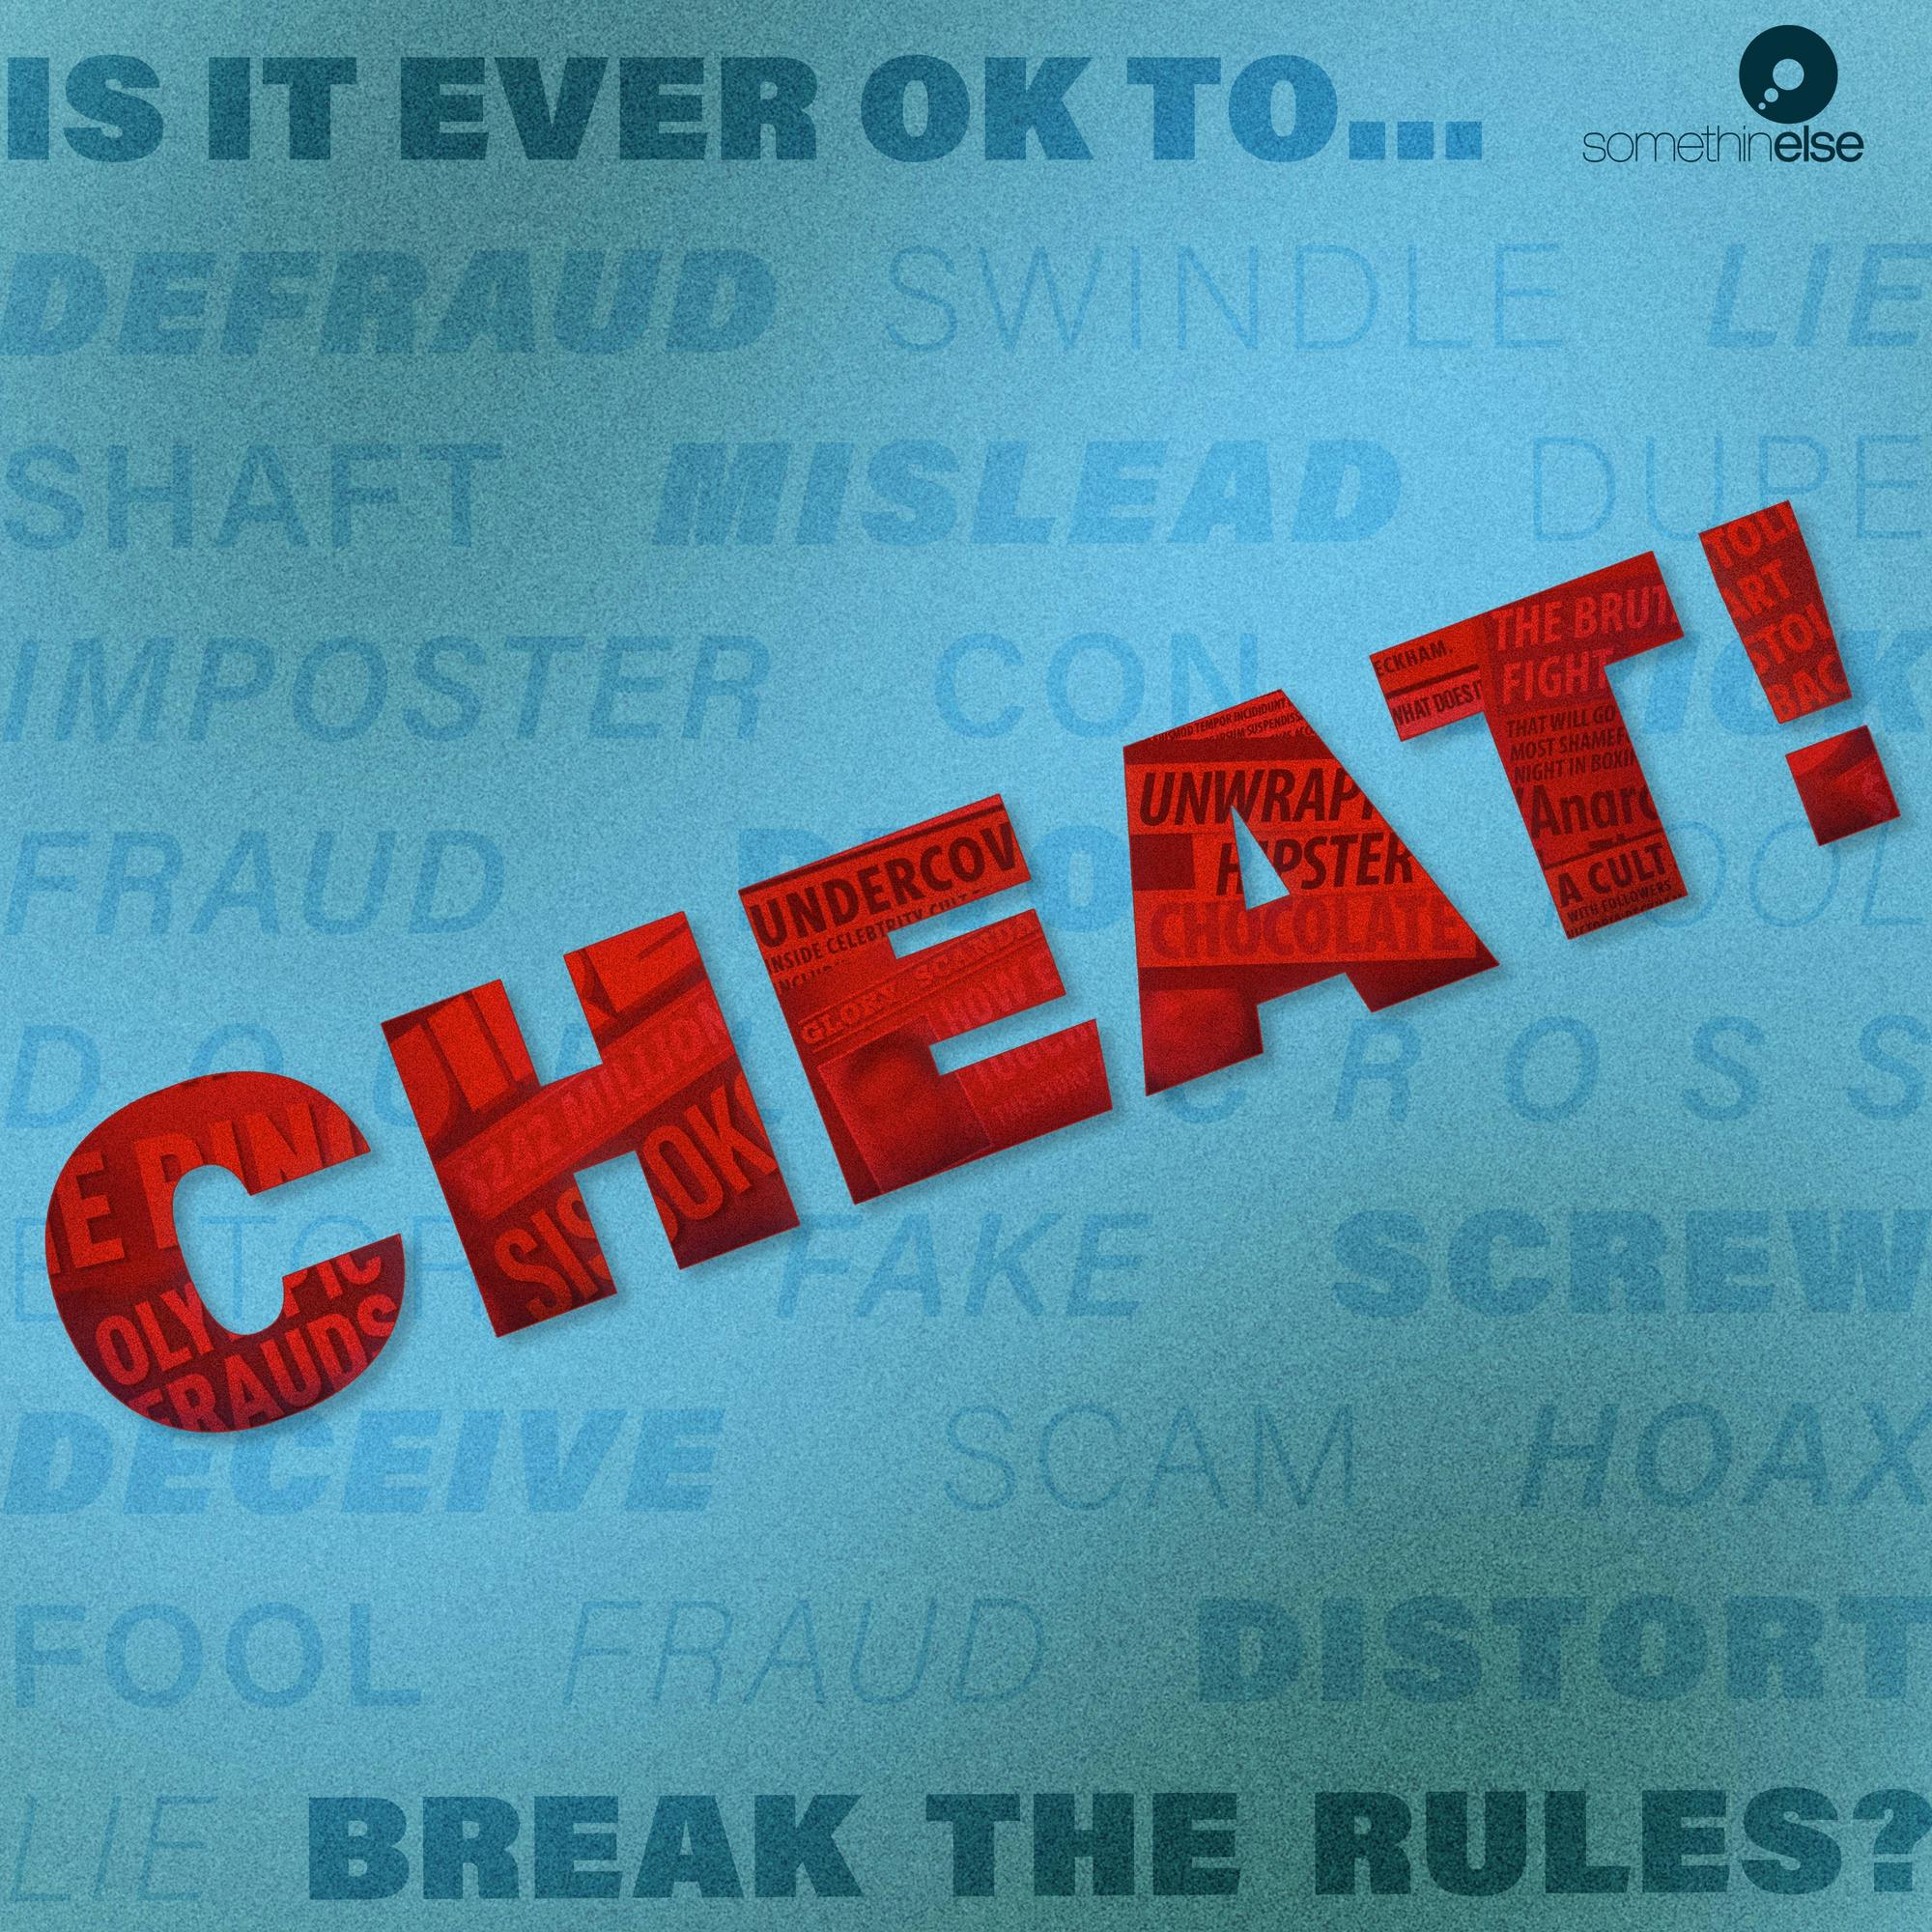 Cheat! is back. New episodes weekly!